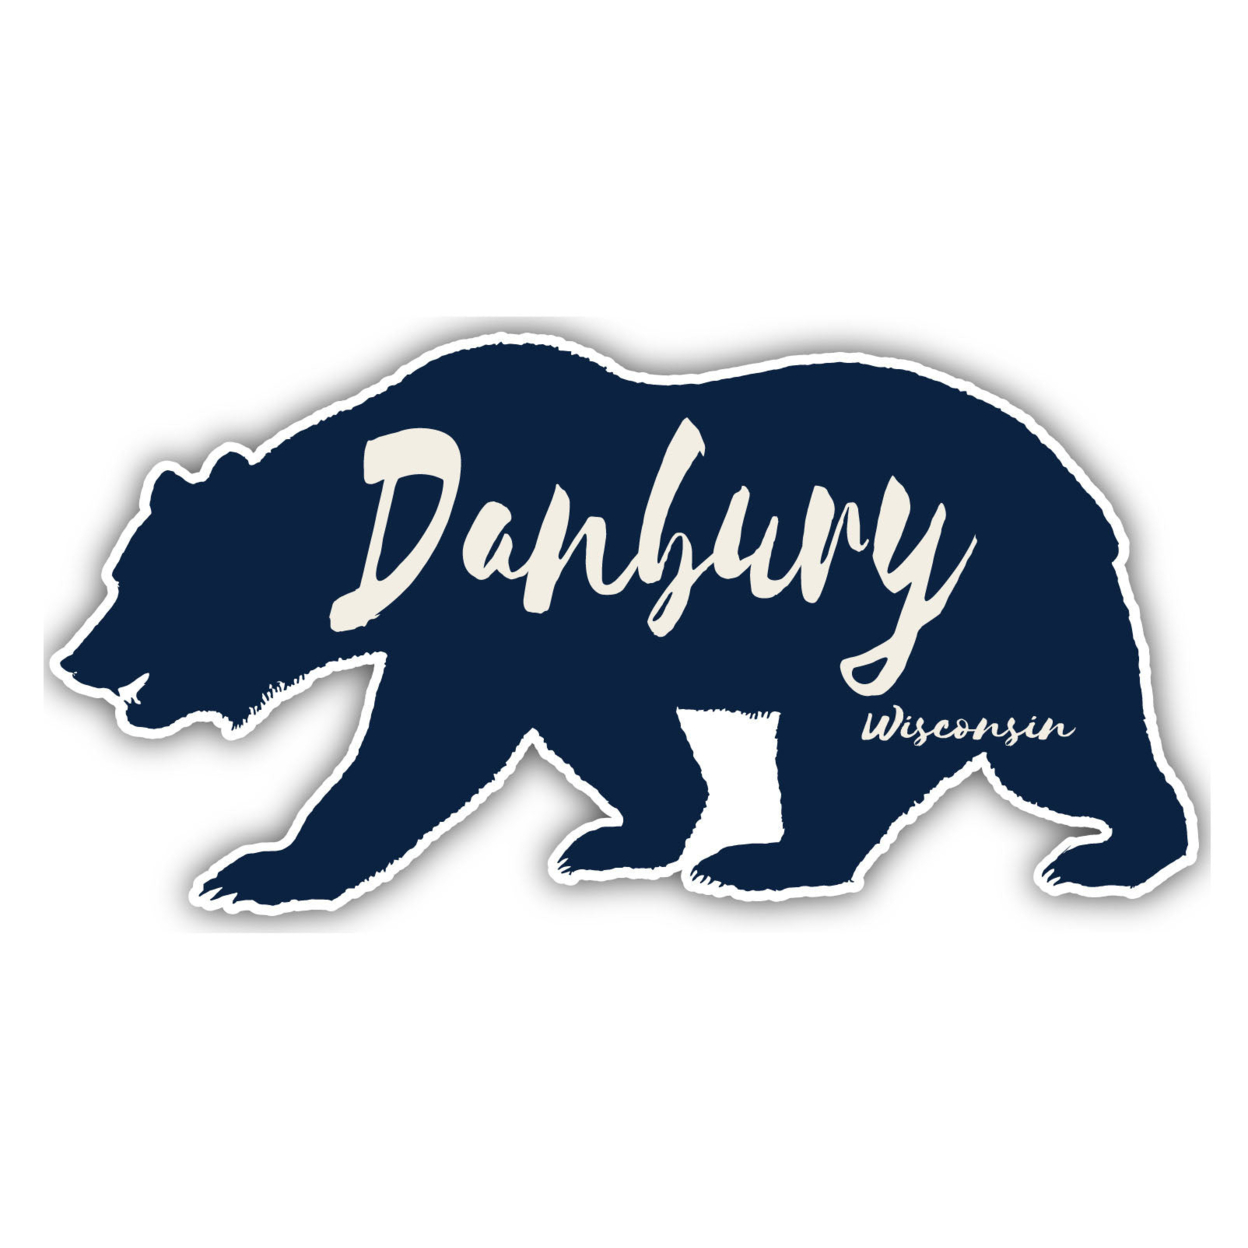 Danbury Wisconsin Souvenir Decorative Stickers (Choose Theme And Size) - 4-Pack, 8-Inch, Great Outdoors